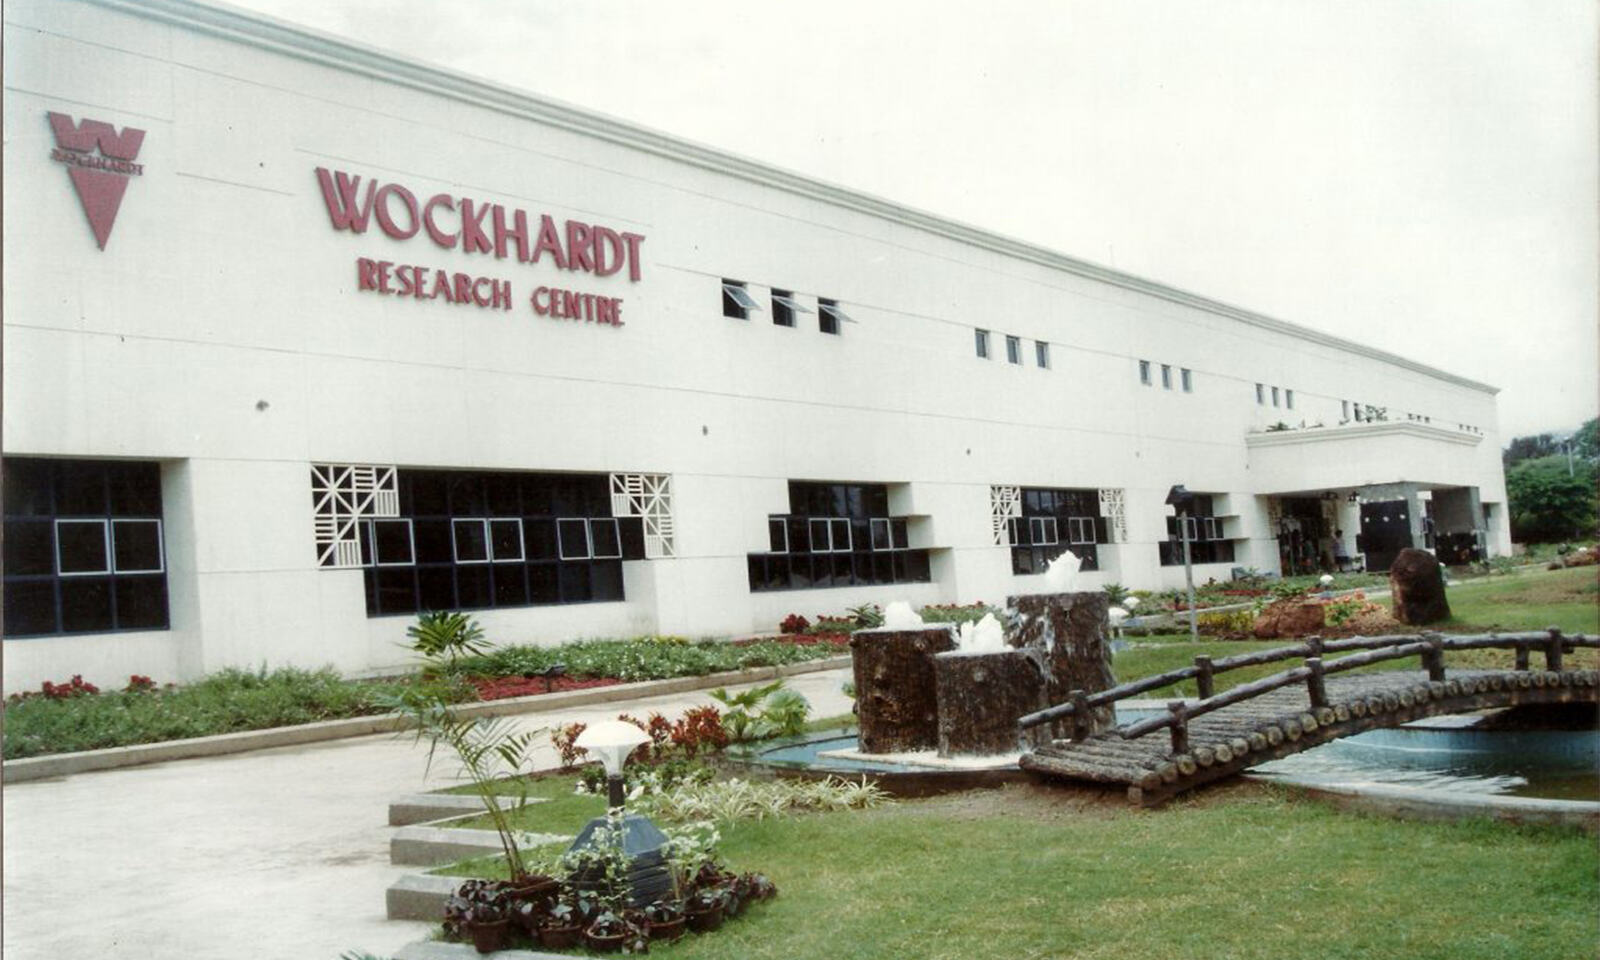 wockhardt hosts prince charles at its wrexham facility in uk